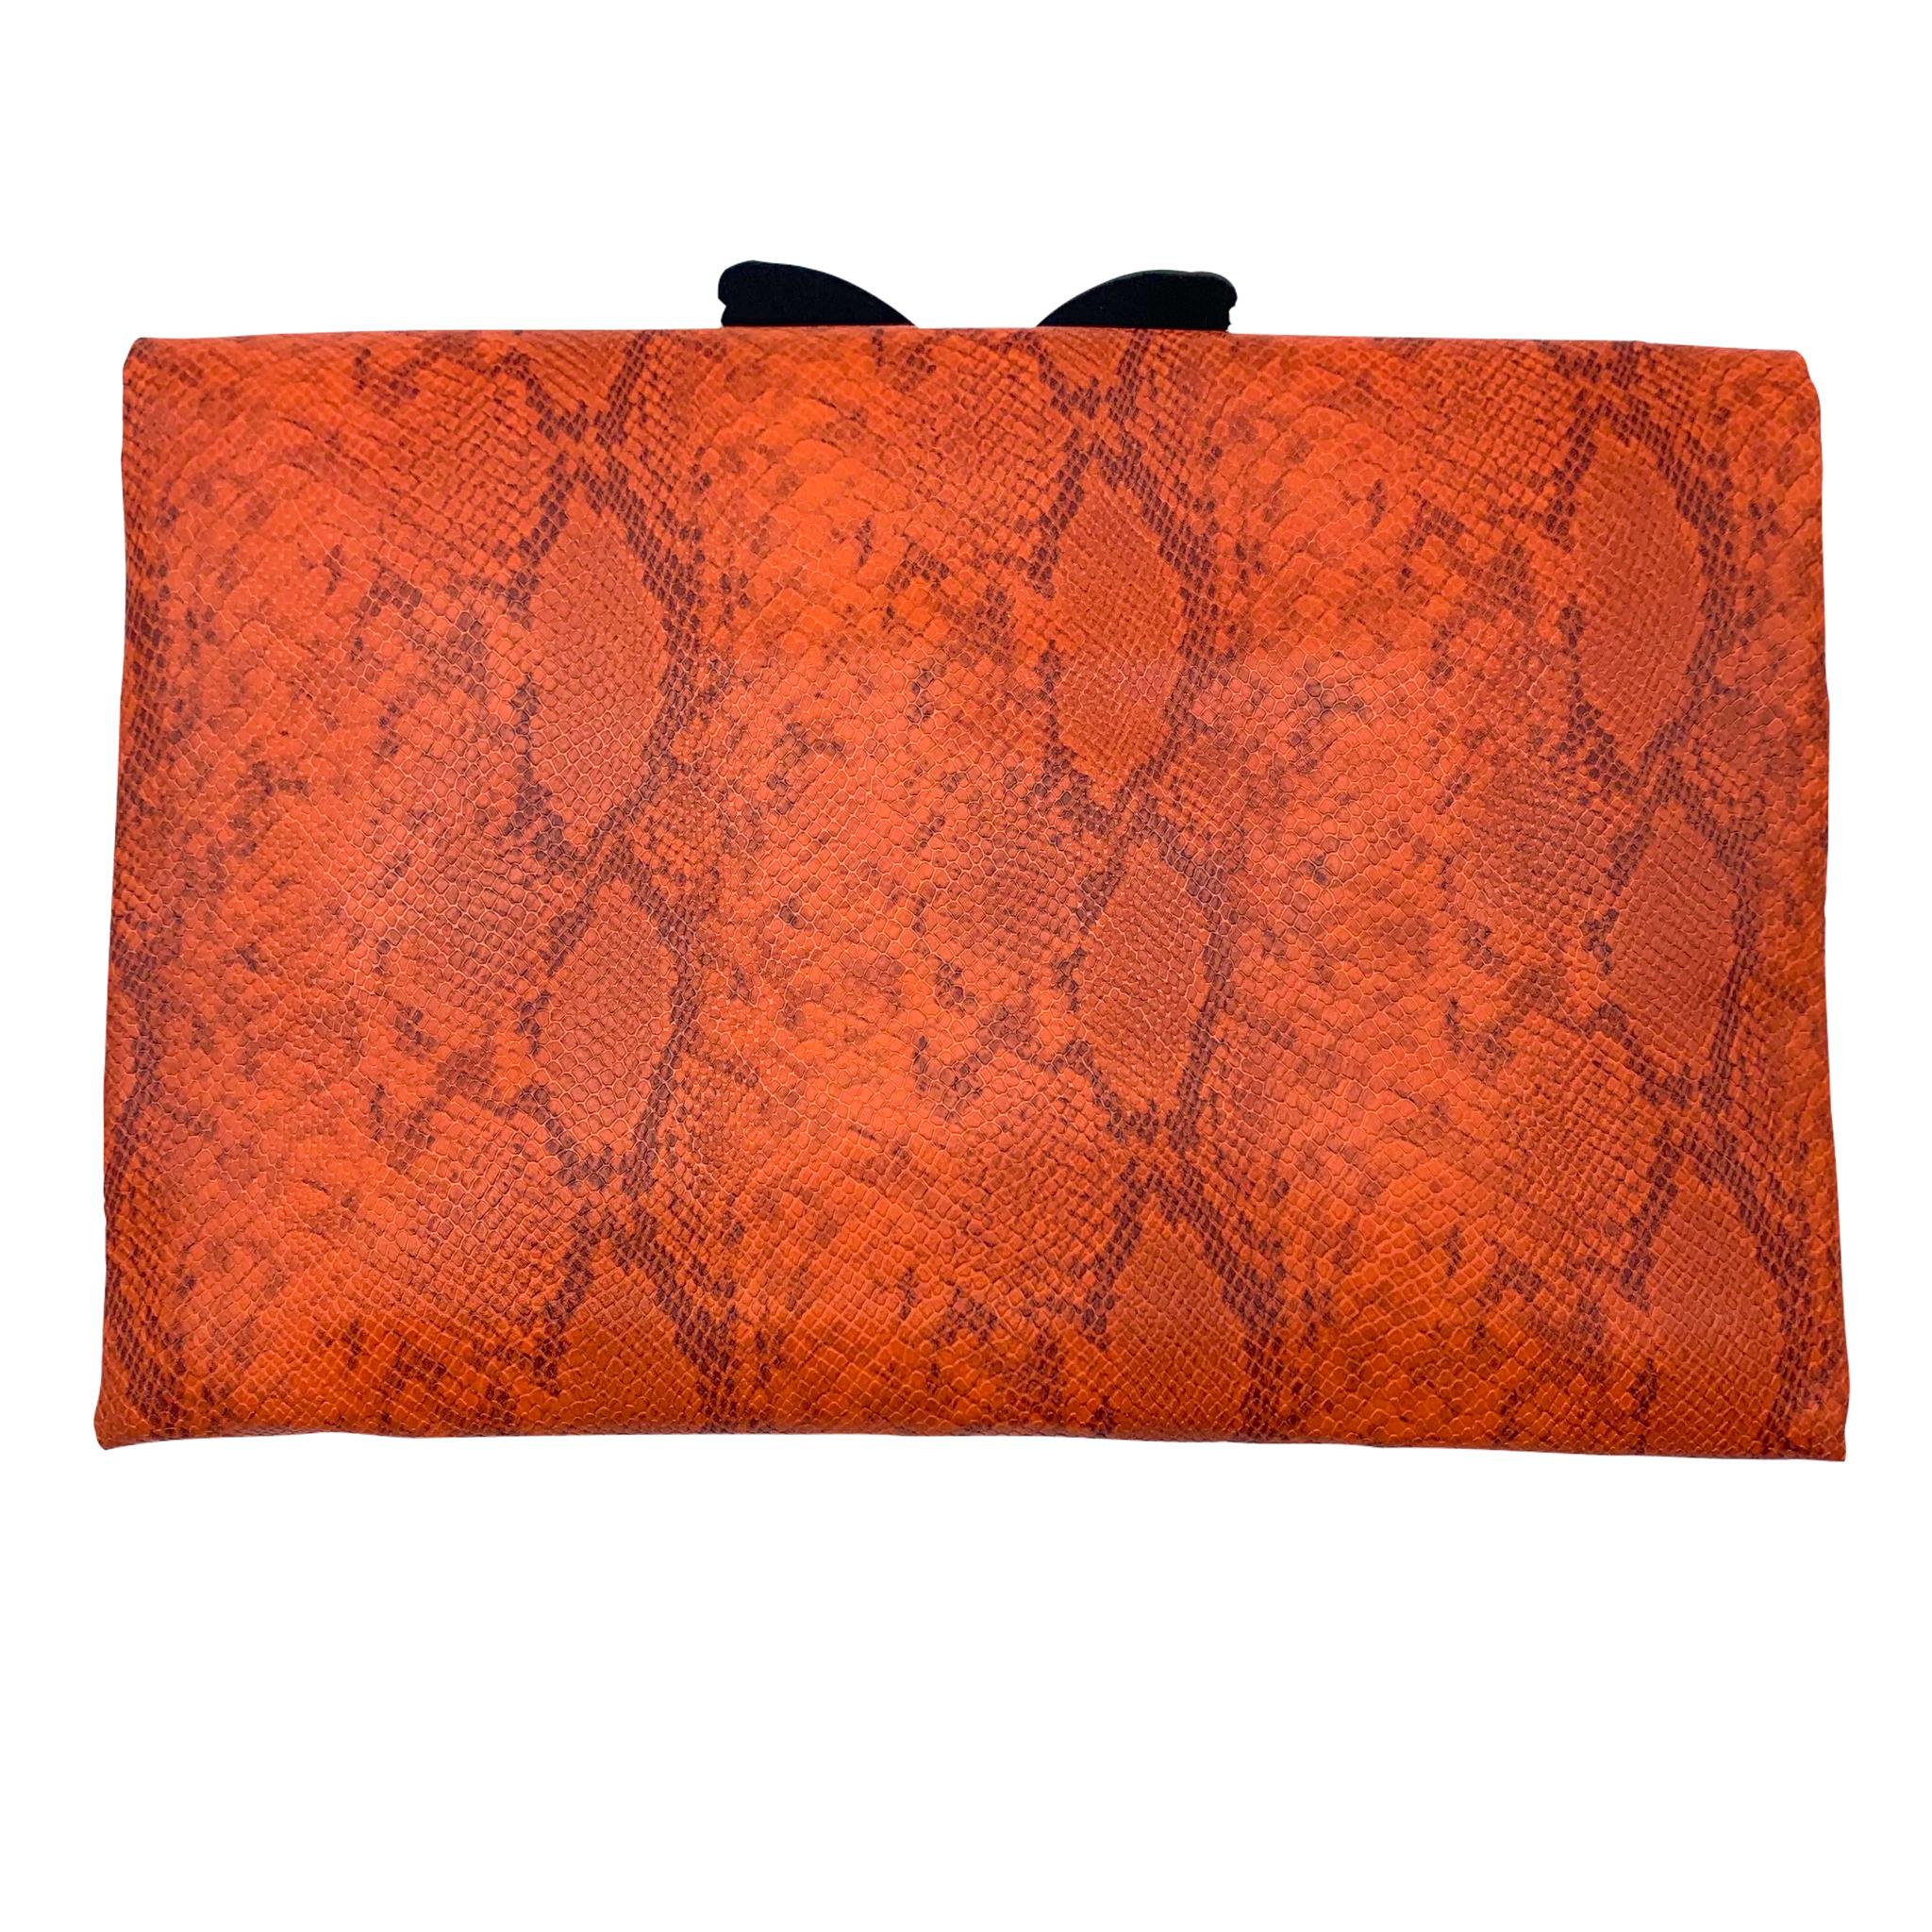 This oversized orange clutch features a faux snakeskin front flap, orange faux strap, and a detachable metal chain to easily convert this bag into a chic crossbody handbag.
Magnetic front closure
Removable, lightweight metal crossbody chain